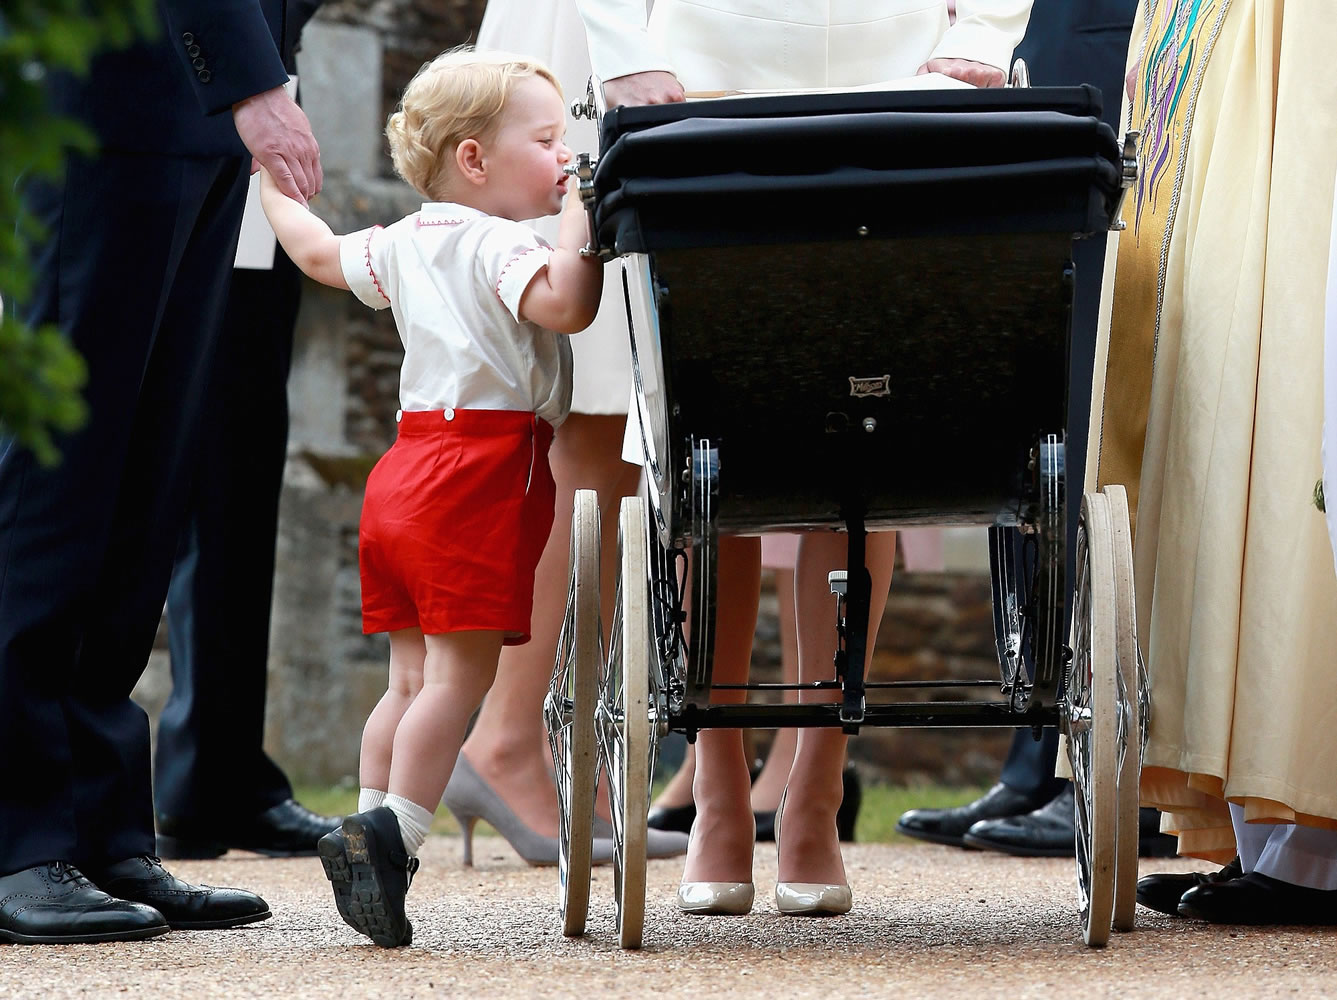 Britain's Prince George of Cambridge looks into the carriage carrying his sister, Princess Charlotte, as his family leaves the Church of St Mary Magdalene after her christening on the Sandringham Estate, England, on Sunday.